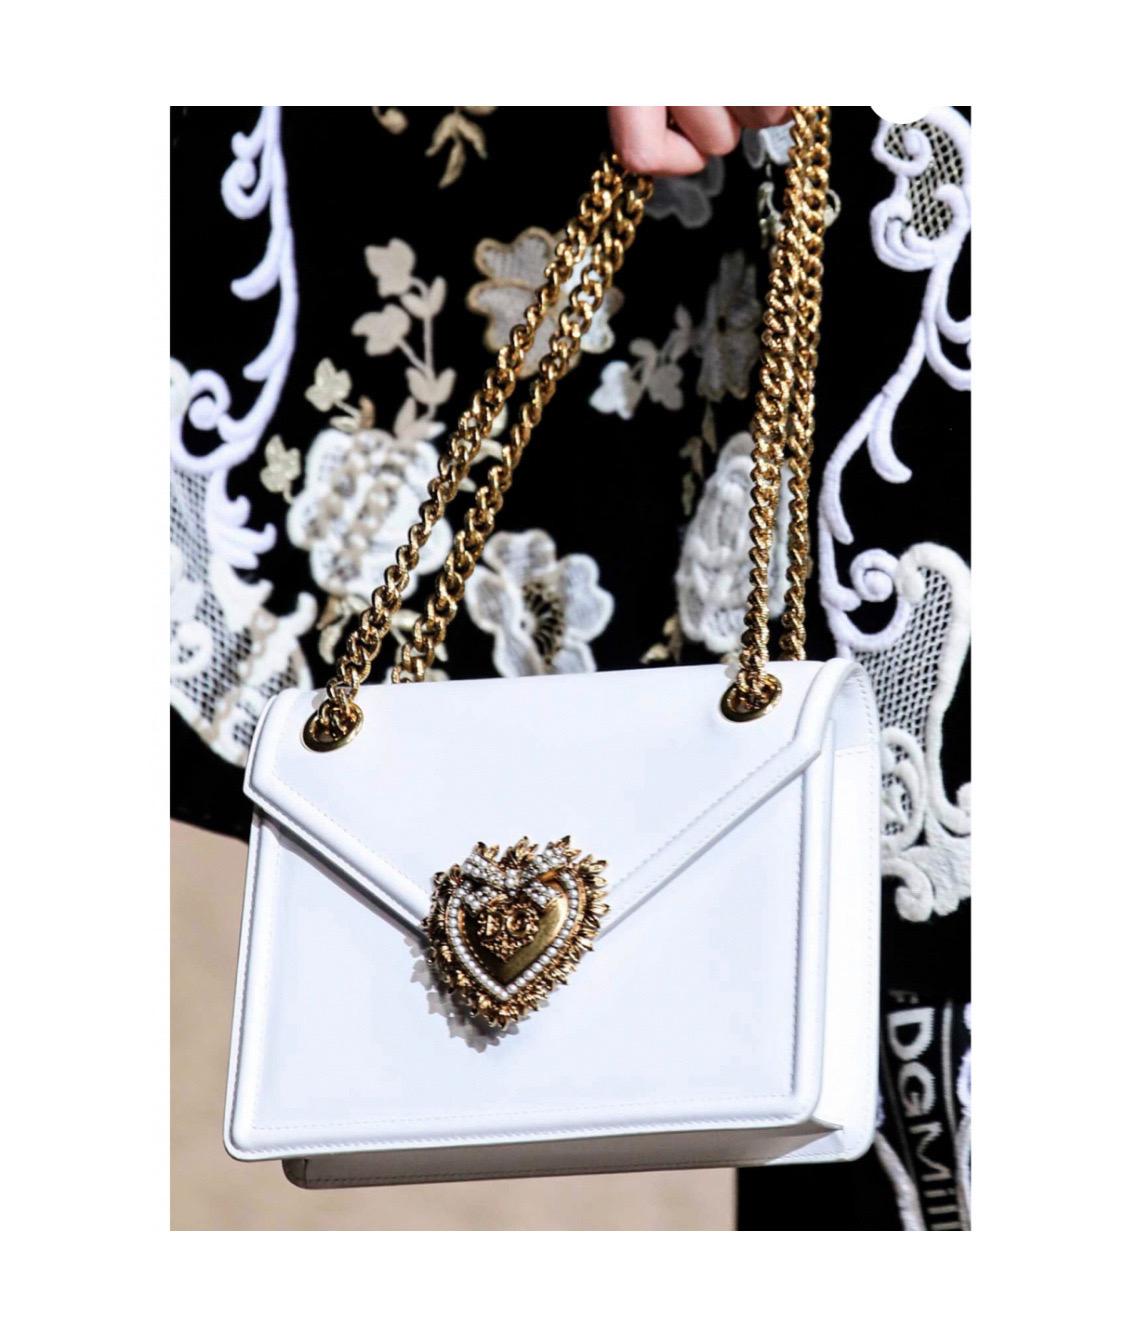 Turn heads with this smooth calf white
leather Devotion crossbody bag by
Dolce & Gabbana. Featuring a stunning
sliding ridged chain shoulder strap and
logo heart seal with gold and pear!
details.

Made in Italy.

Size: 20 x 15 x 4cm

100%